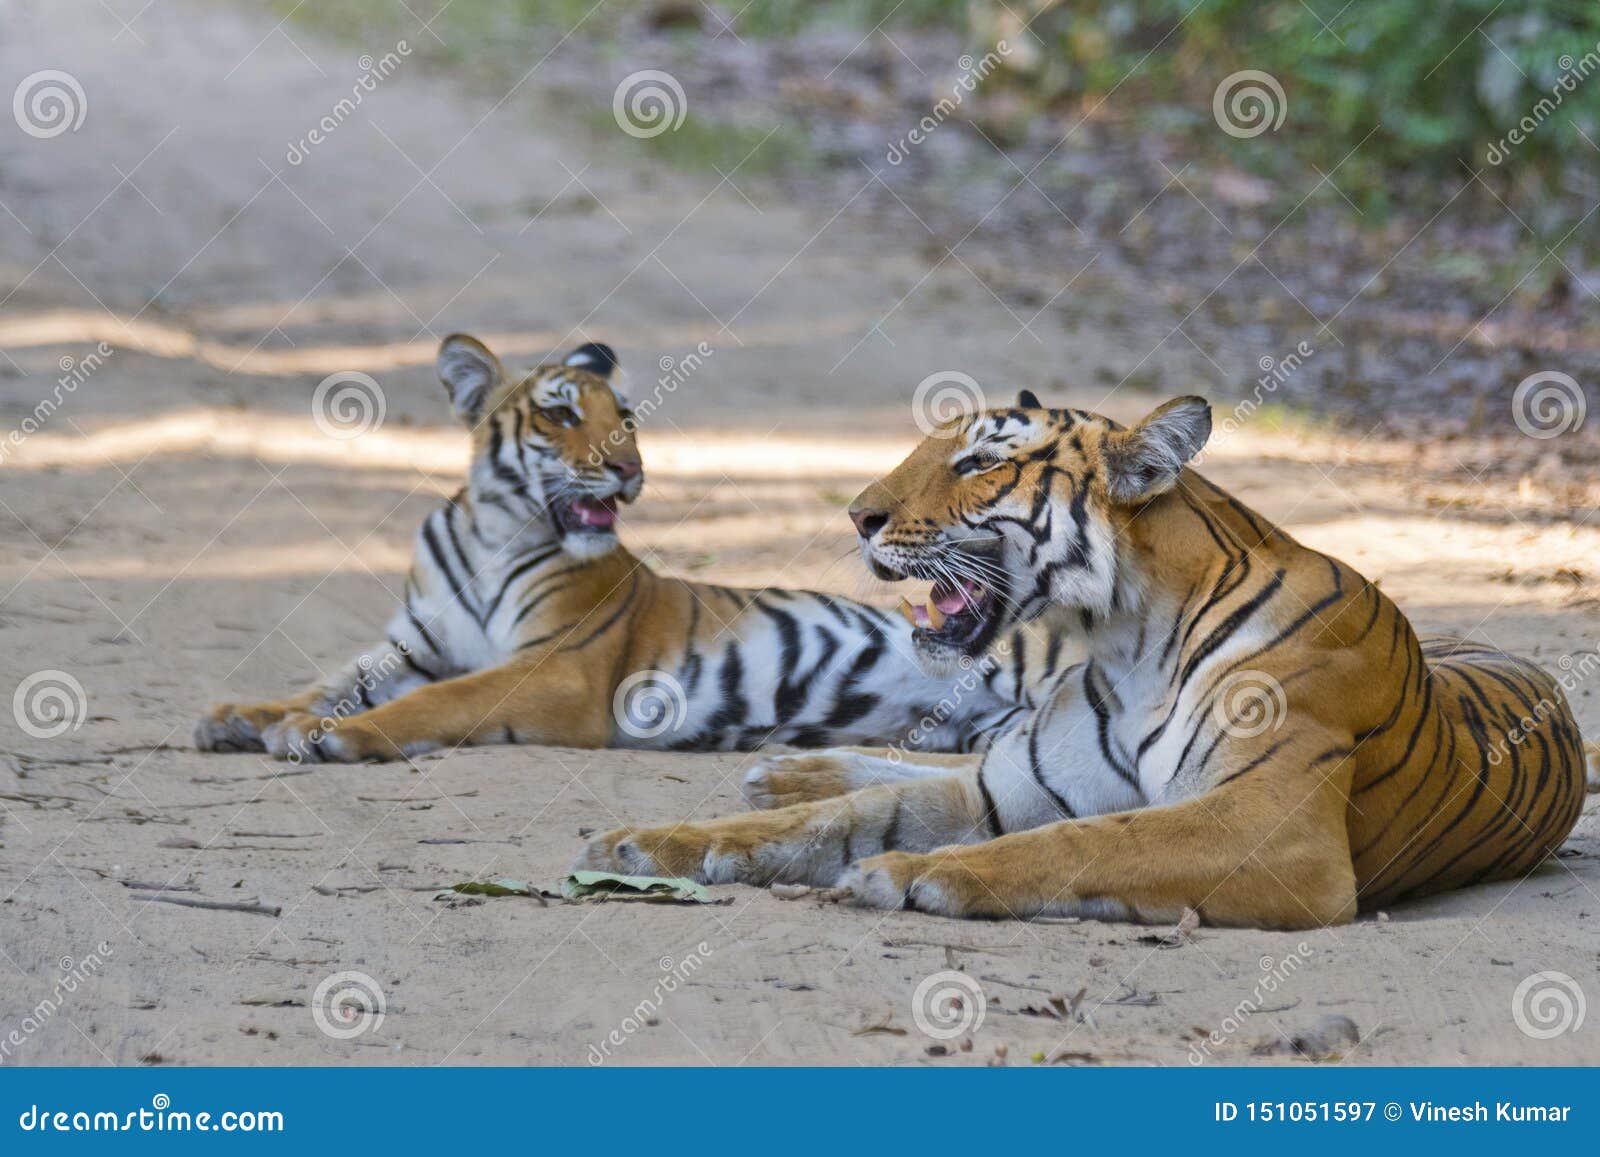 tigress with cub resting in the forest of jim corbett